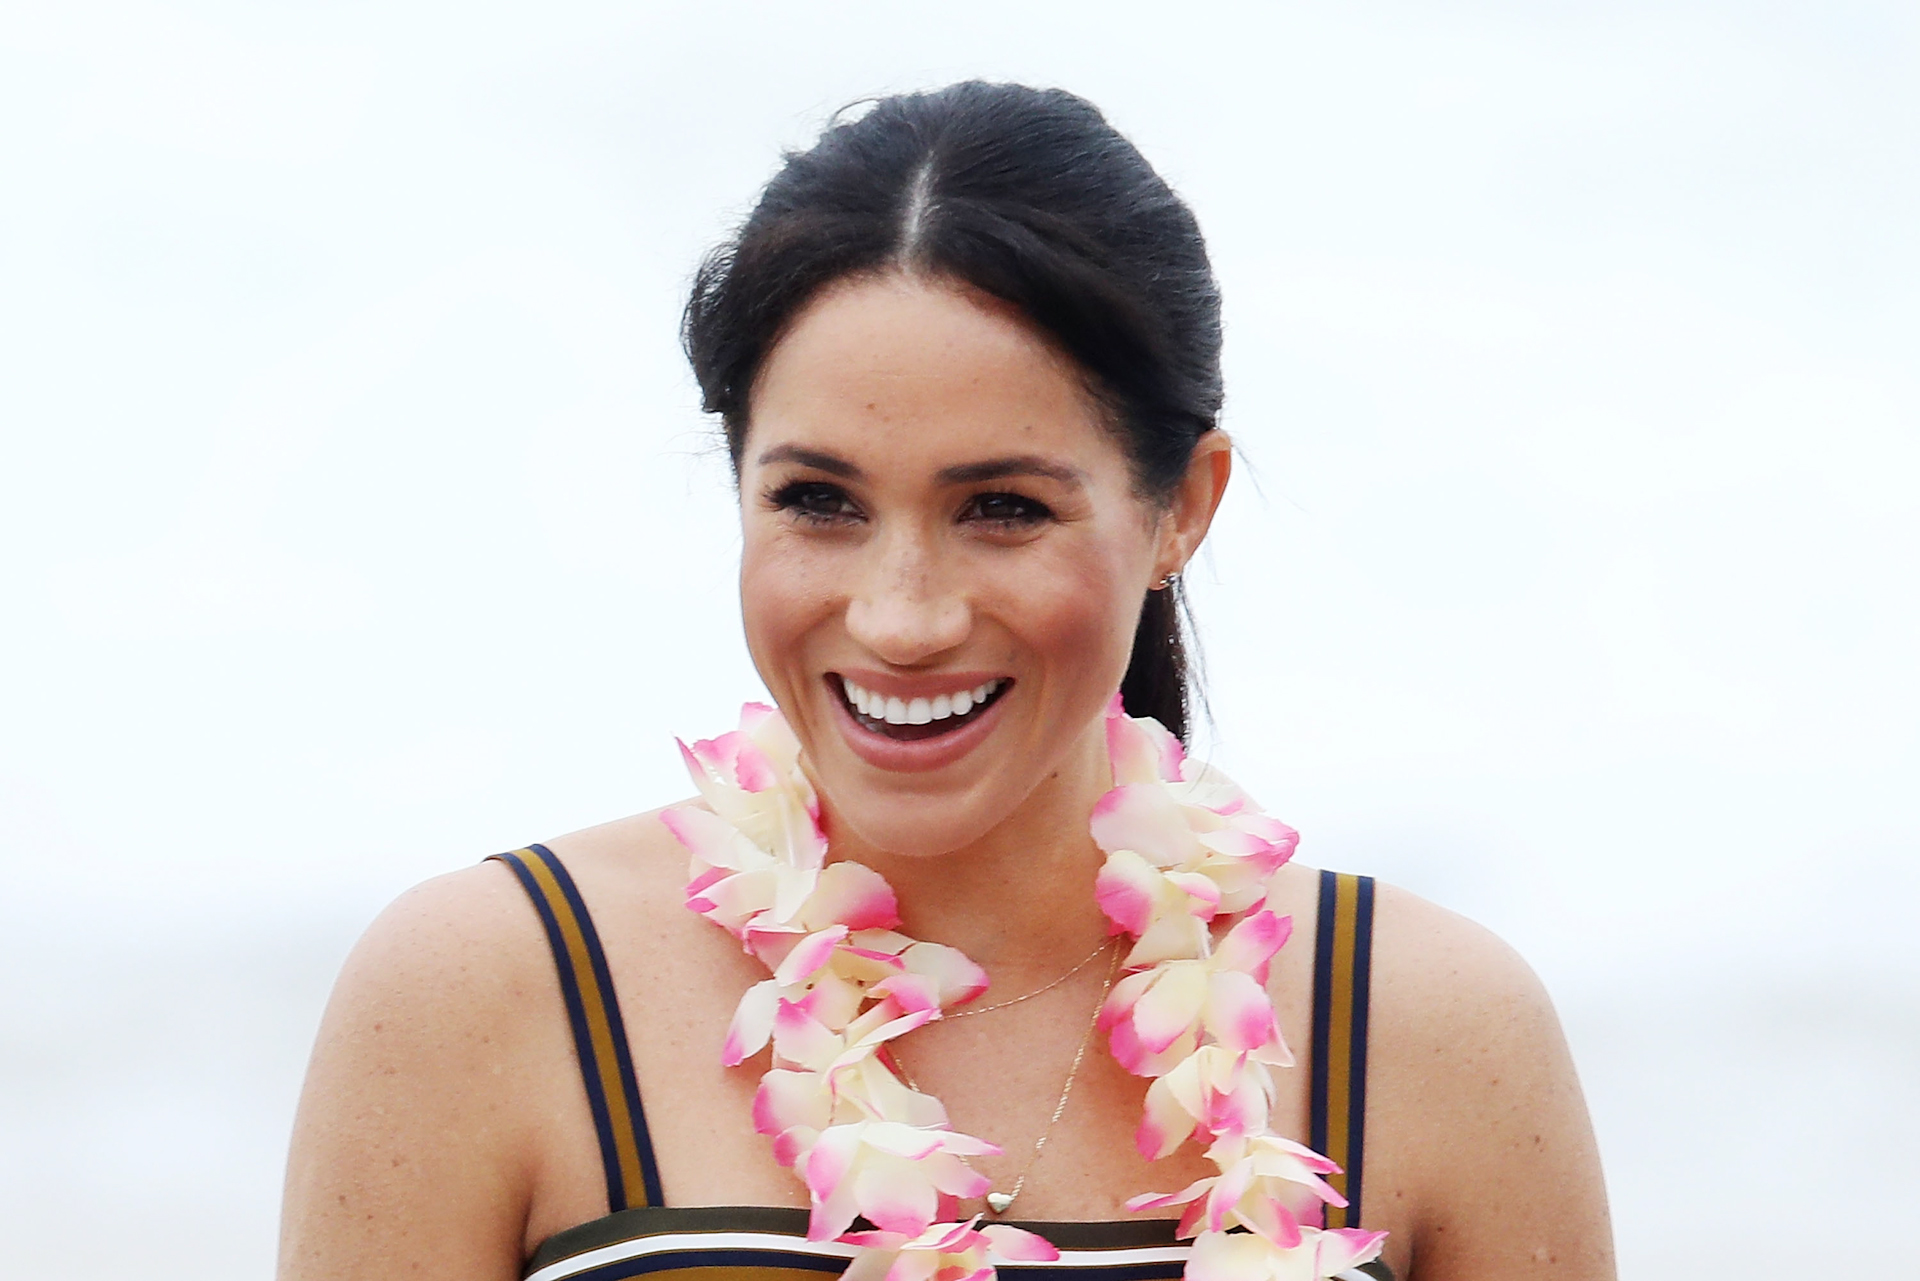 Painful revelation about Meghan Markle: 'then you have to pay'